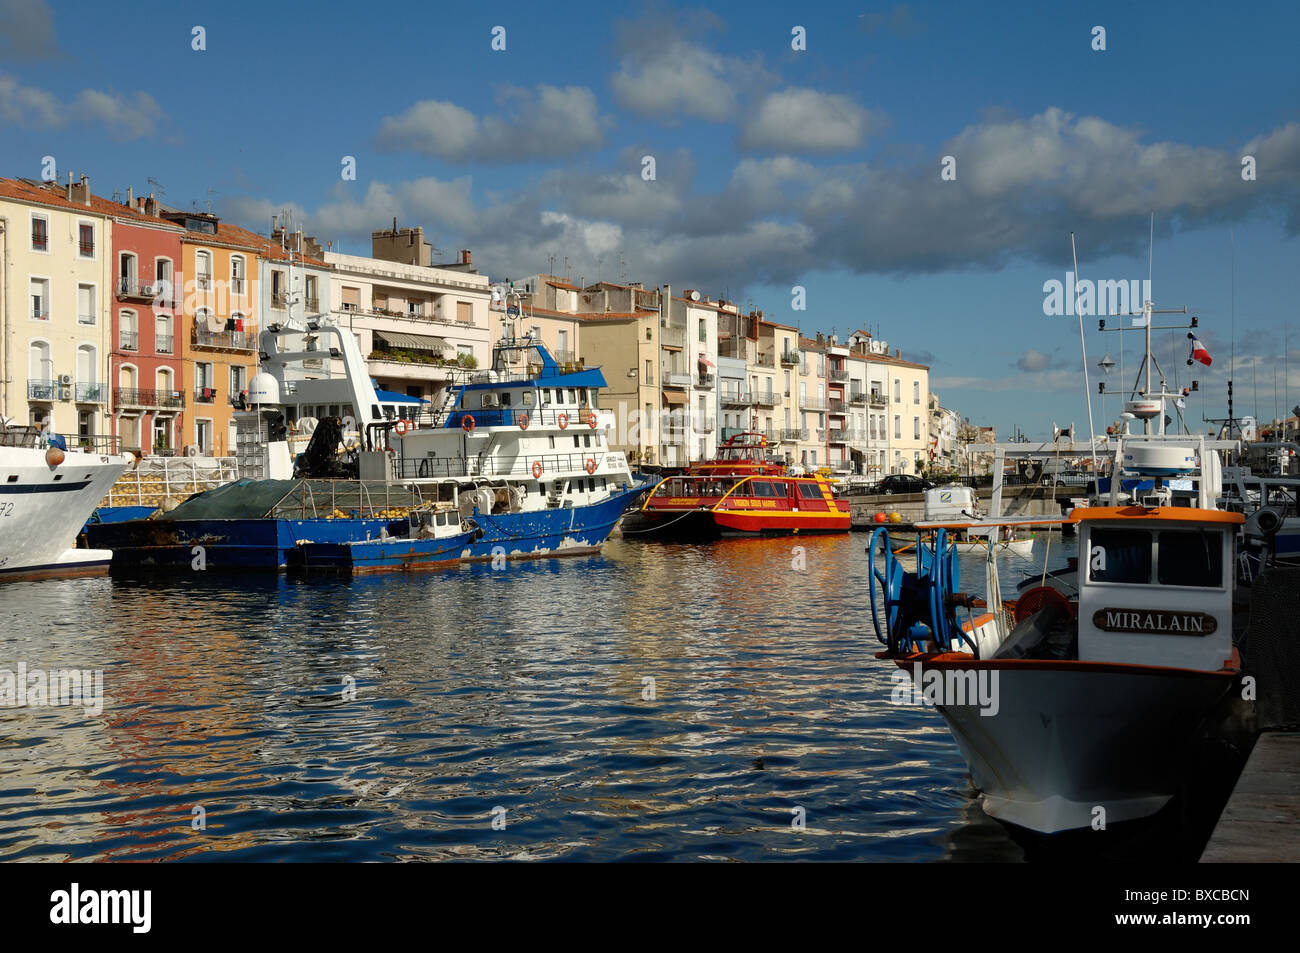 Fishing Boats and Canalside Houses or Housing on the Canal Royal, Quai de la Resistance, Sète, Hérault, France Stock Photo